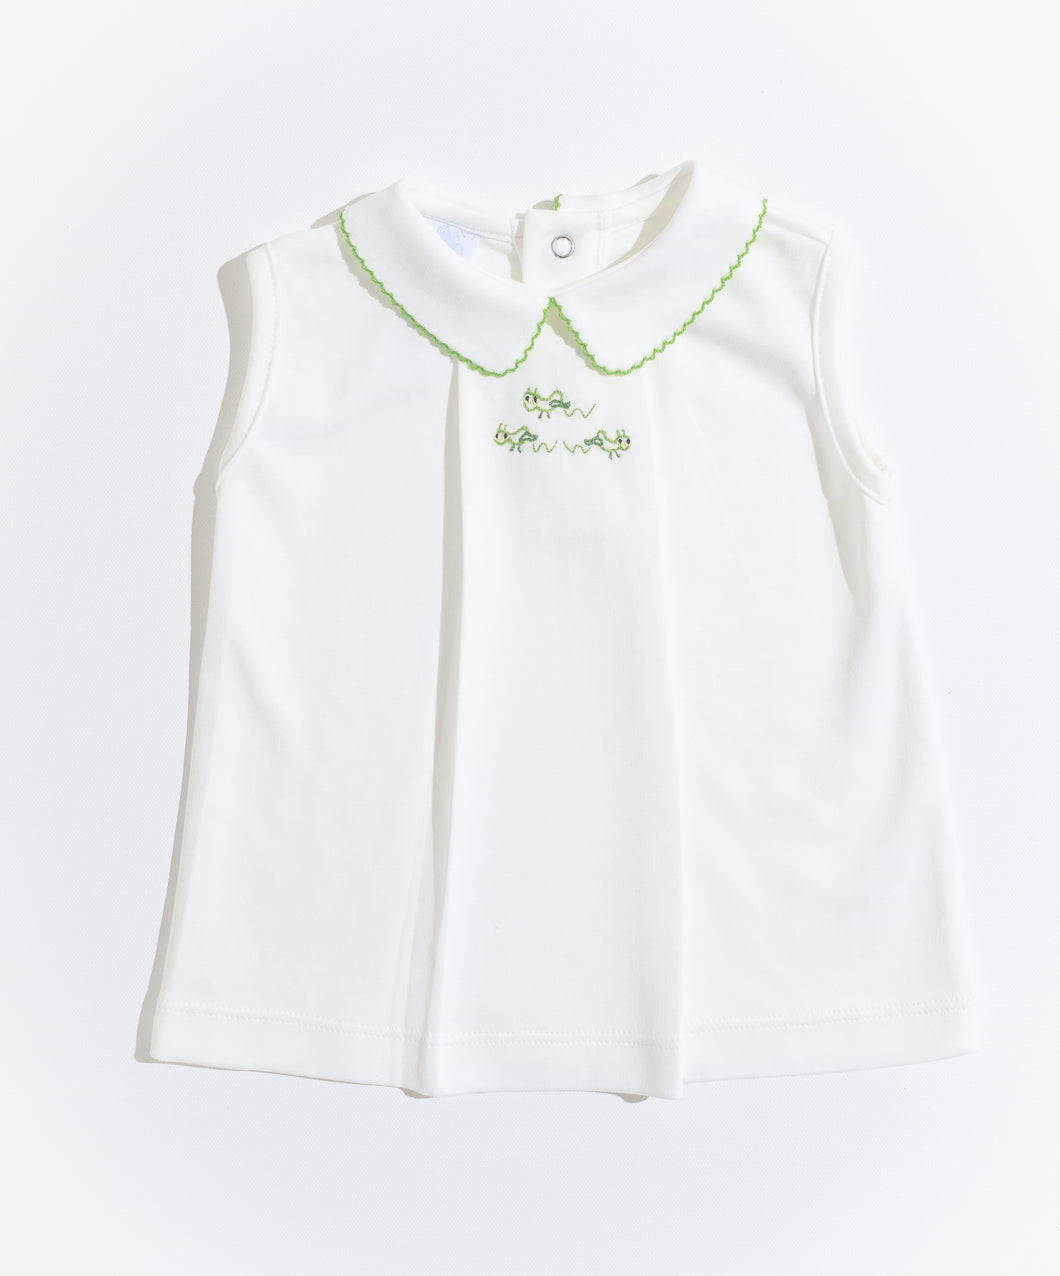 Boy Pleated Sleeveless Shirt with Hand Embroidery : Grasshoppers